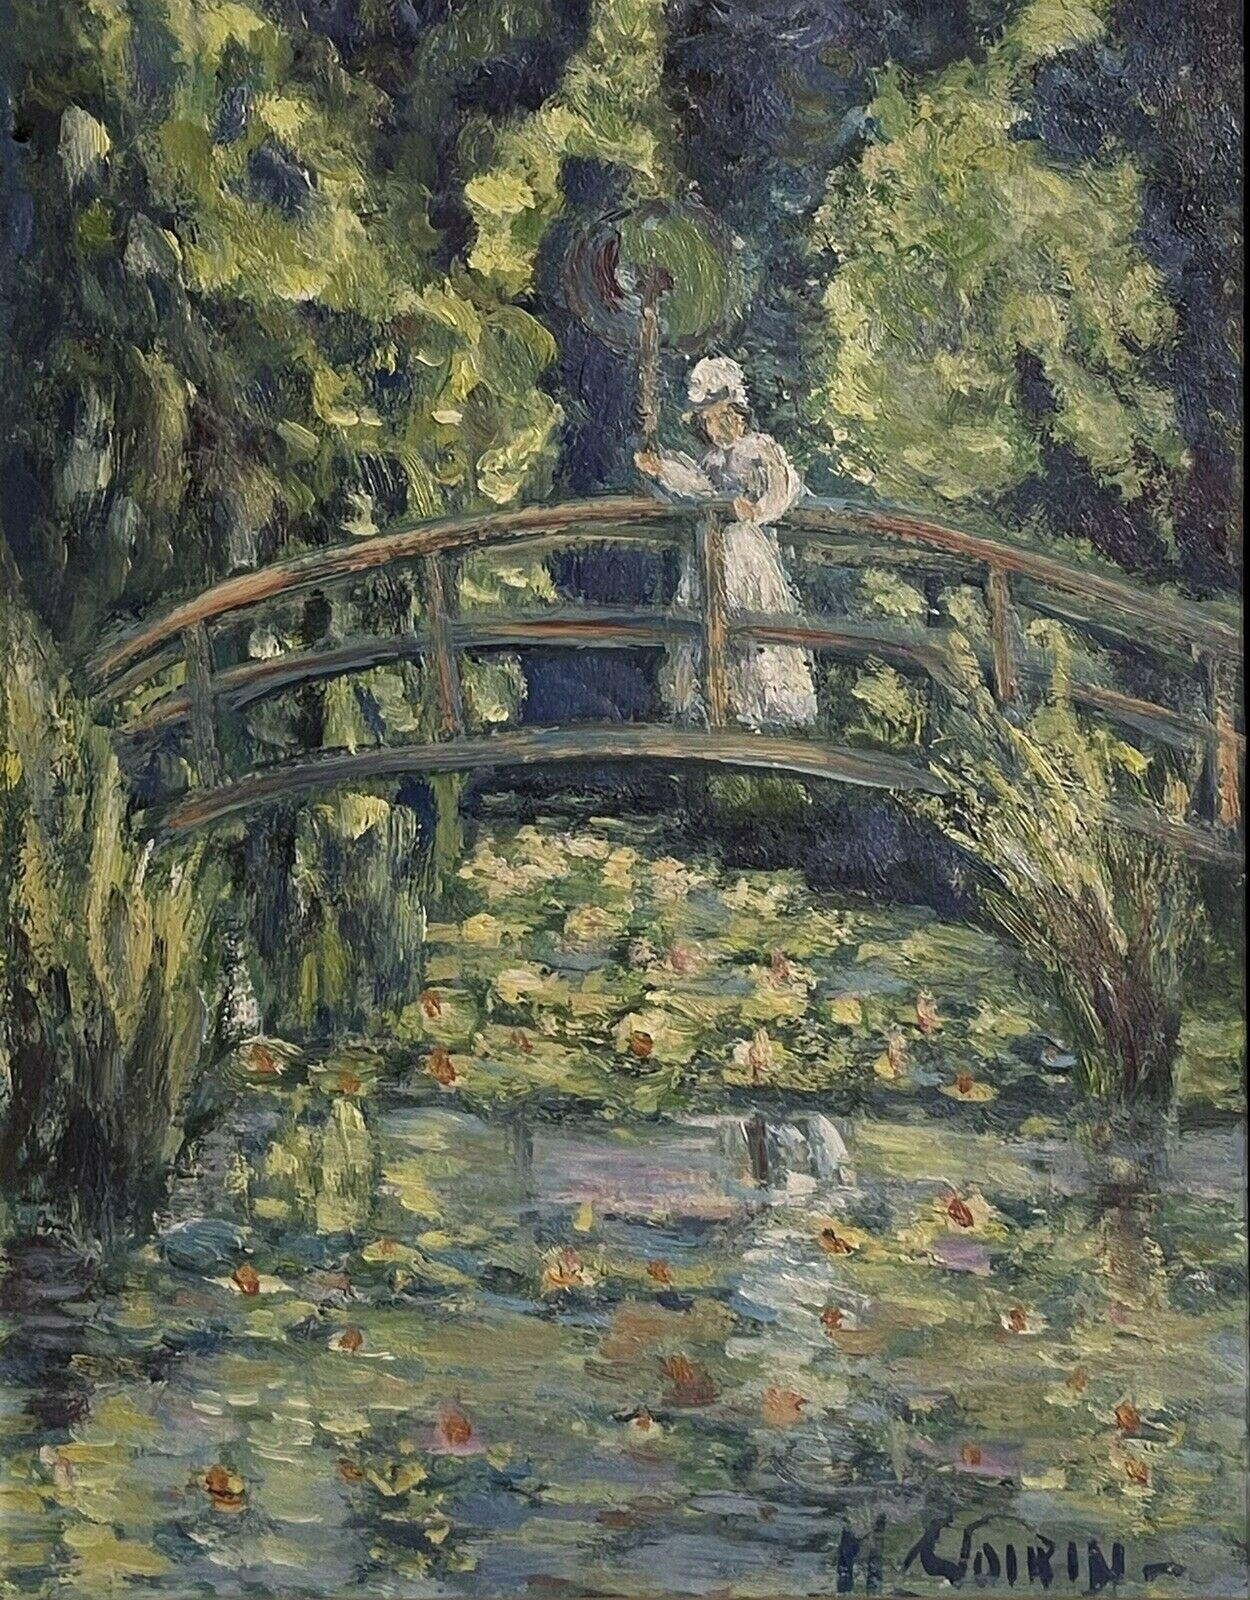 The Japanese Bridge Monet's Waterlily Pond Giverny, Signed Impressionist Oil